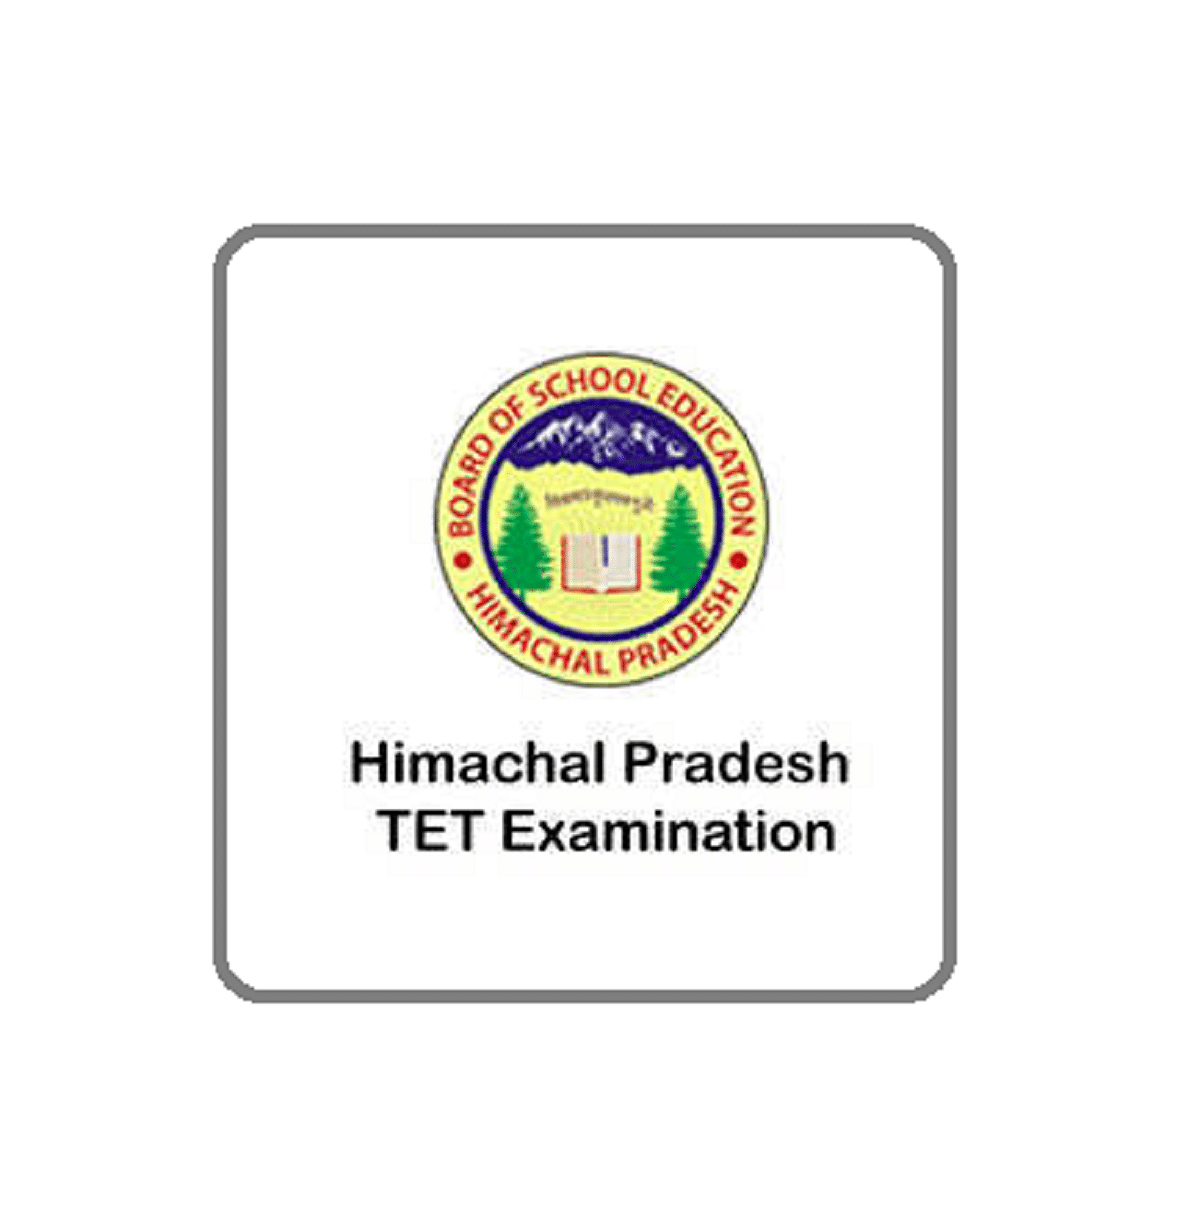 HP TET 2020: Extended Application Last Date Conclude Today, Apply Now